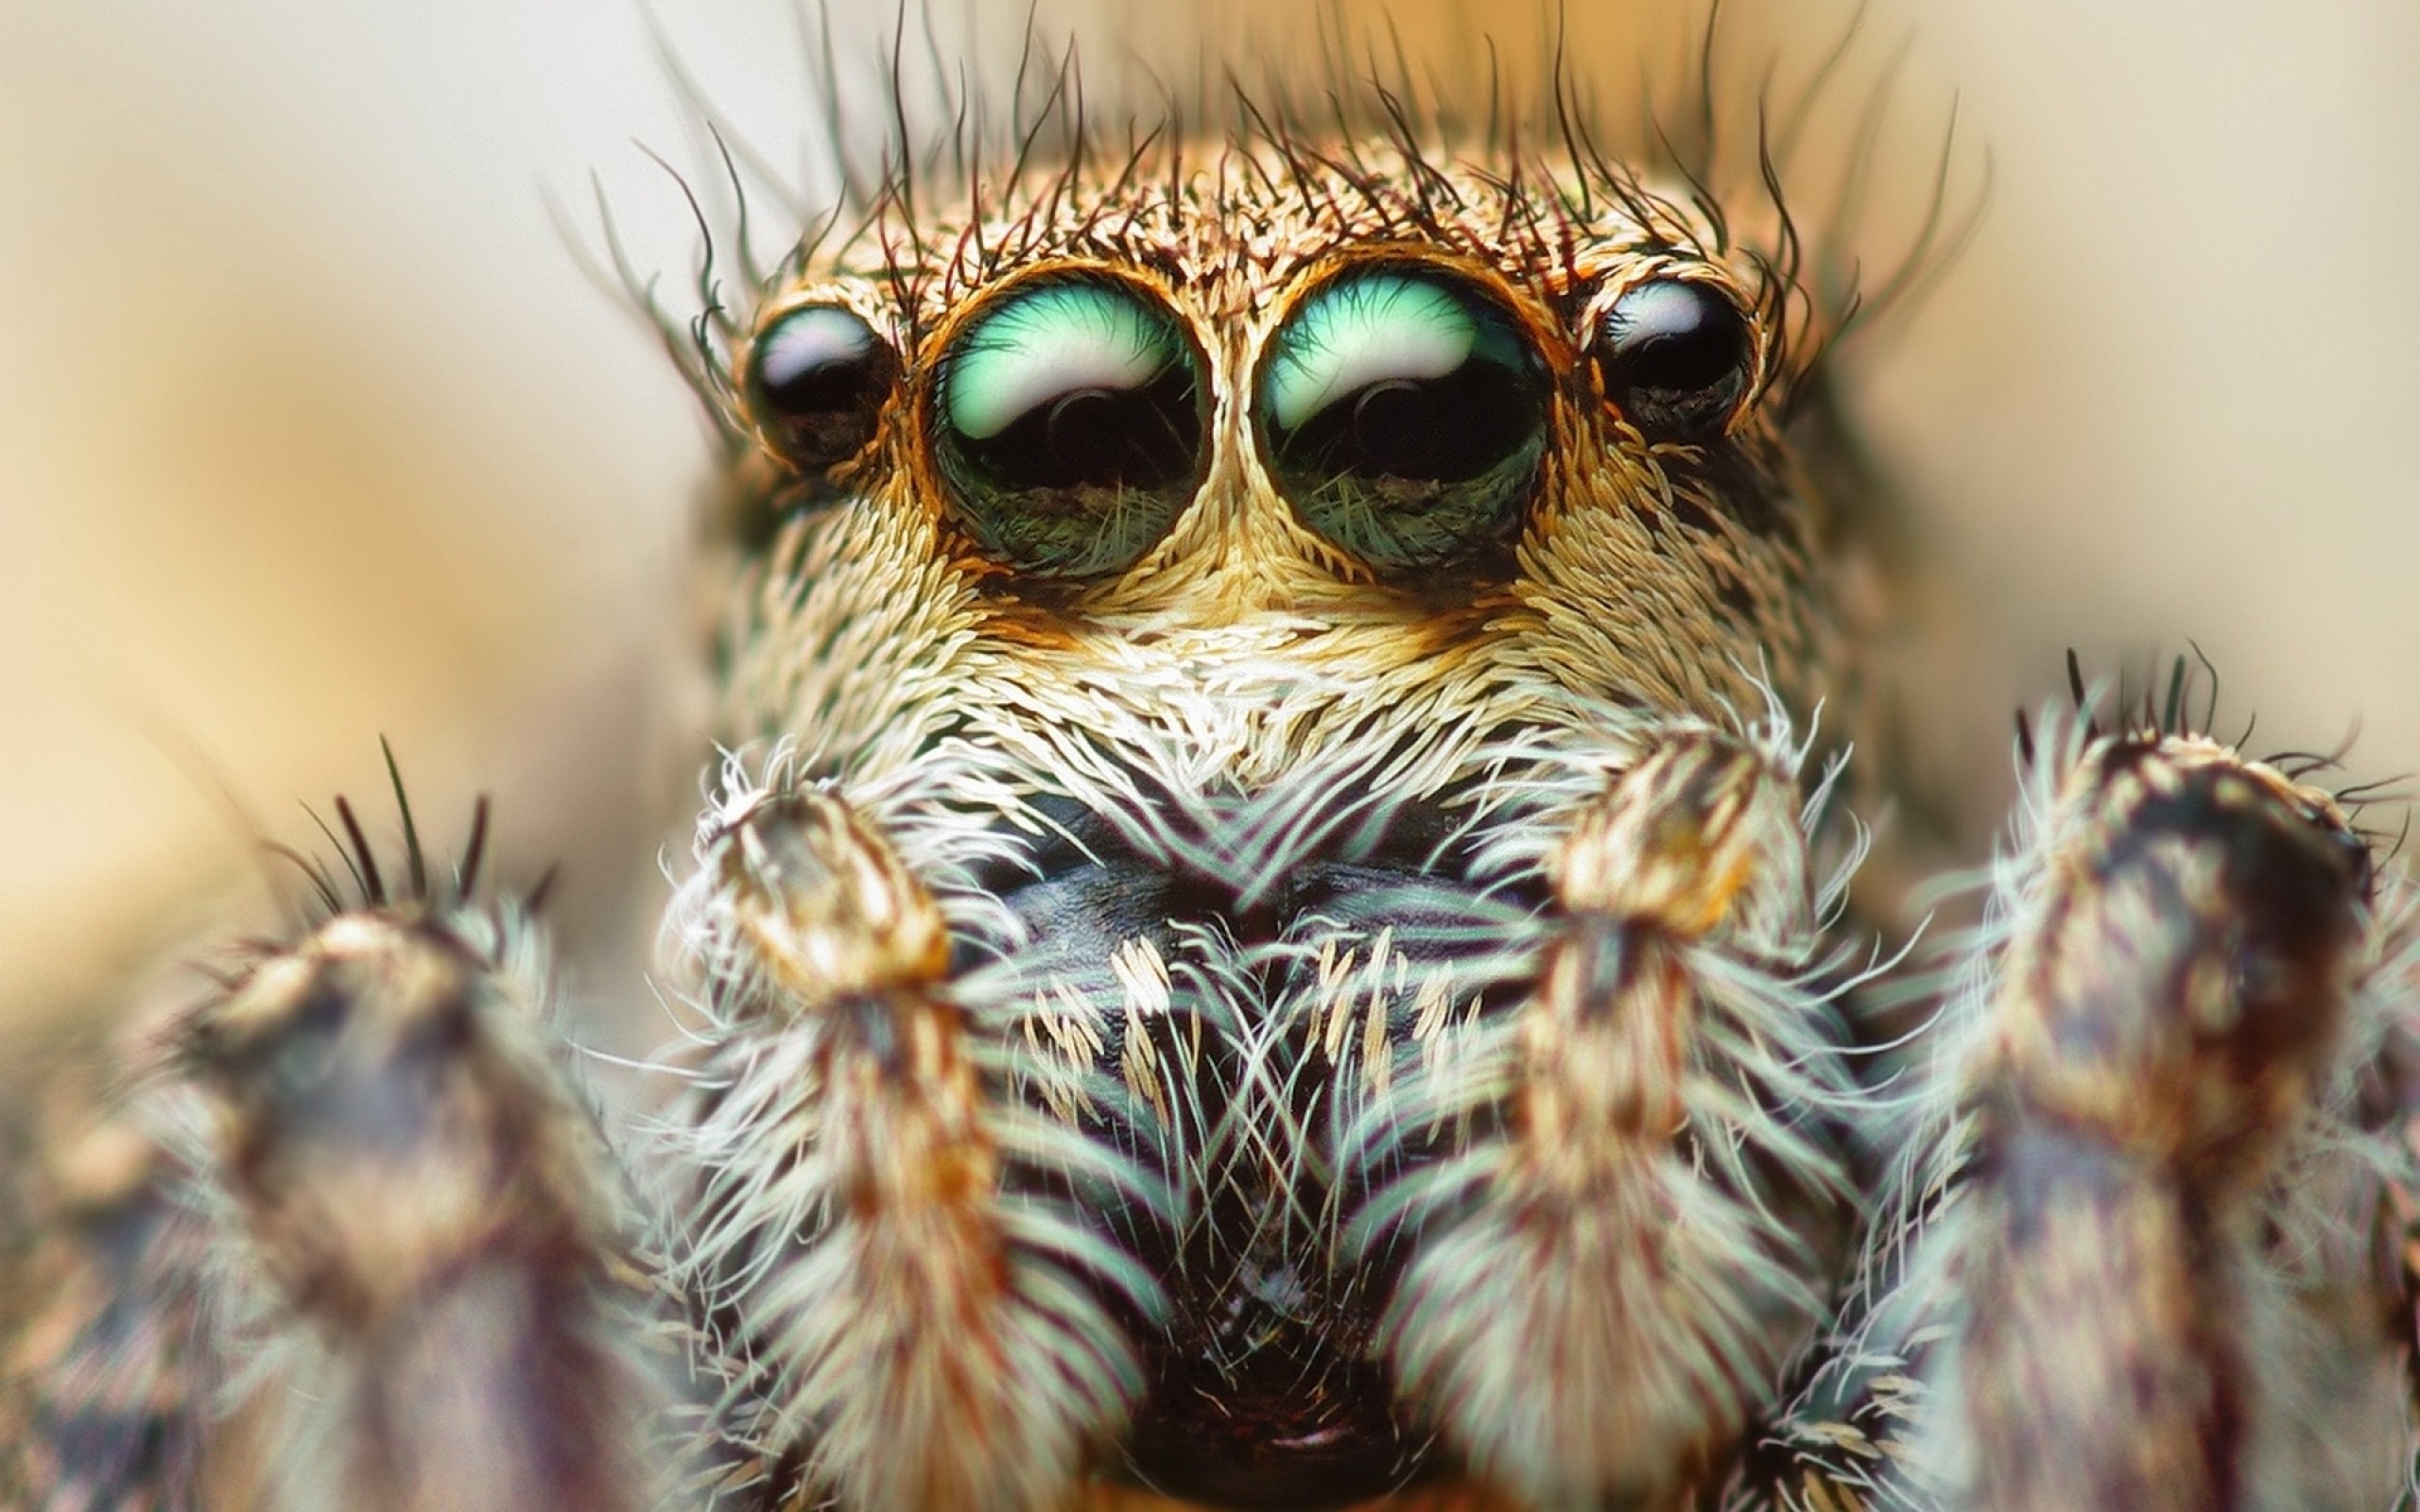 moving spider wallpaper, macro photography, close up, eye, organism, insect